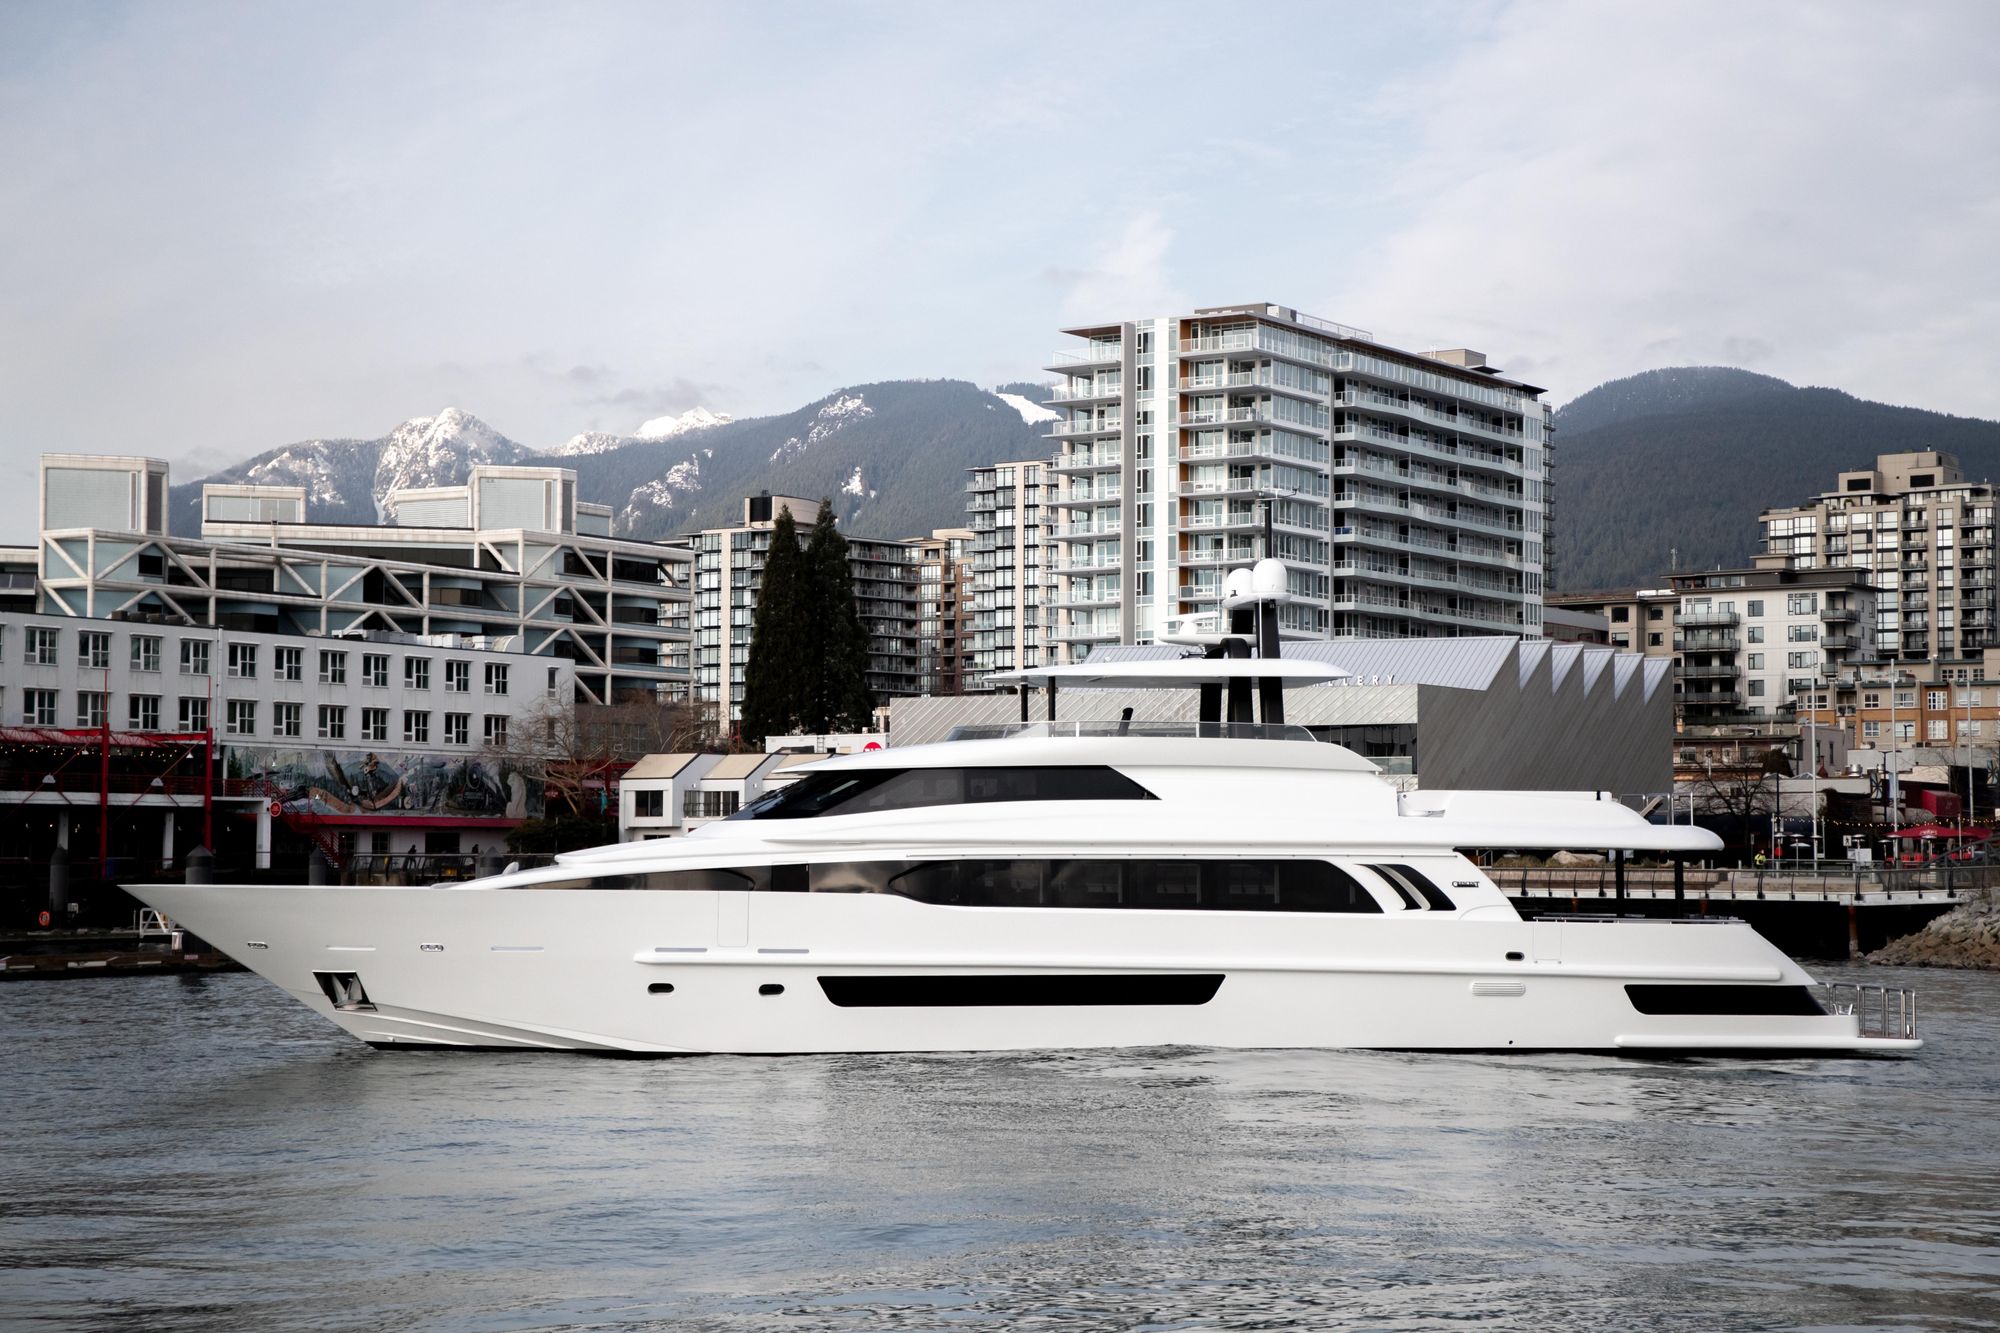 Designed by the renowned Naval Architect Gregory C. Marshall, the CRESCENT 117 features a contemporary, elegant exterior and an interior that will stand the test of time.